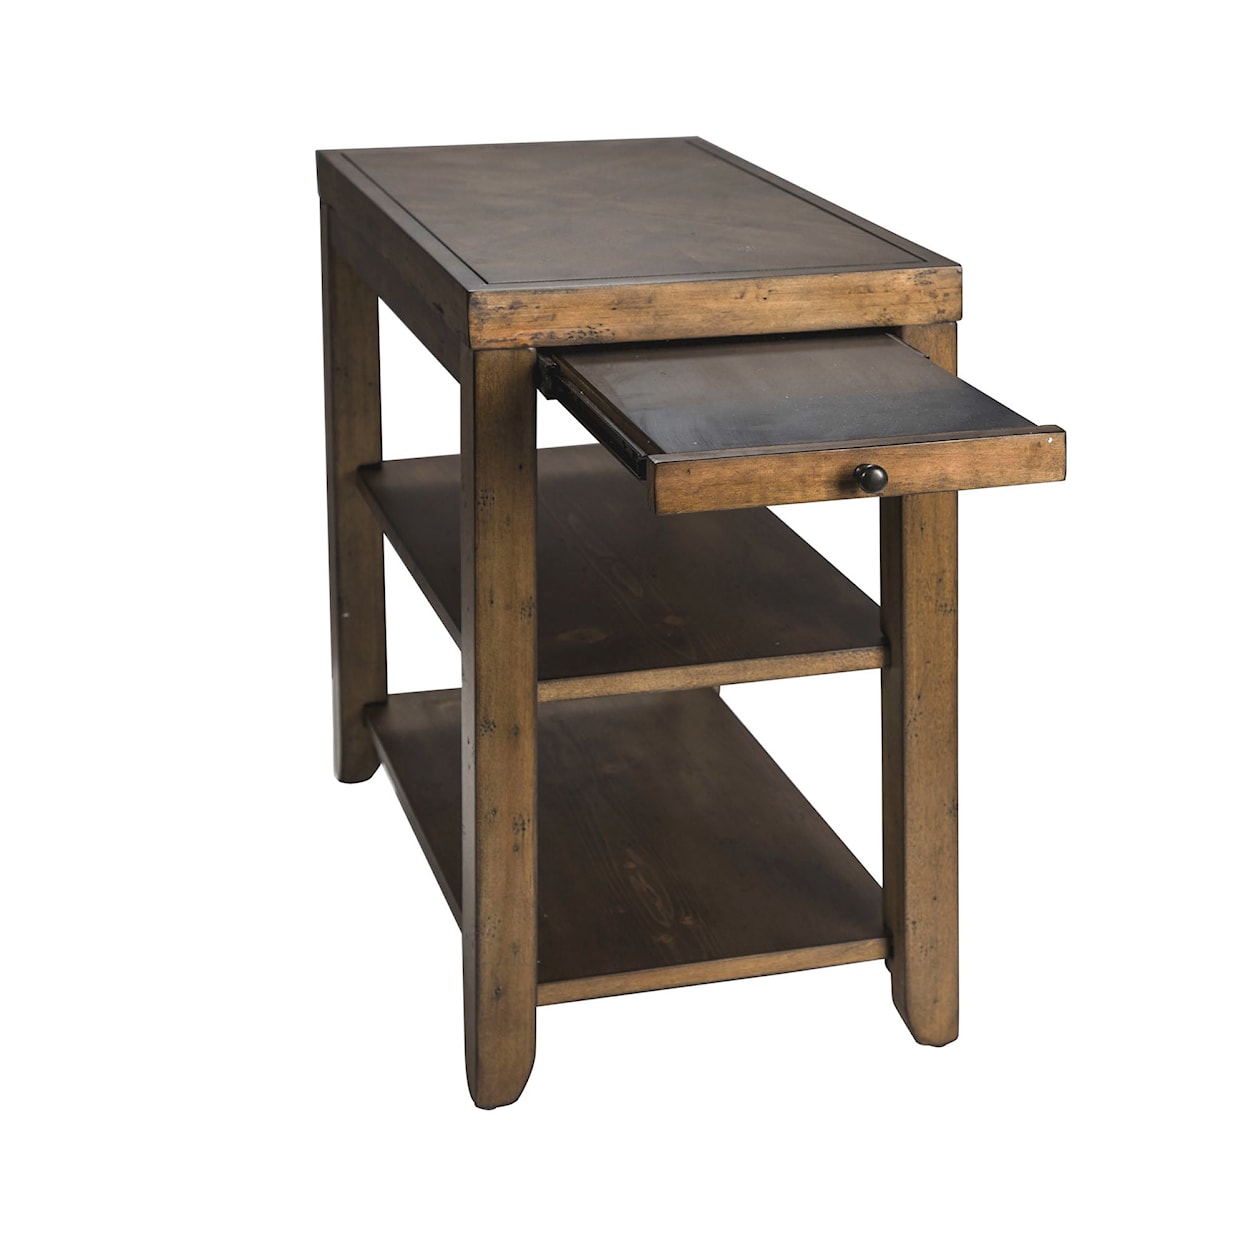 Libby Marley 3-Shelf Chairside Table